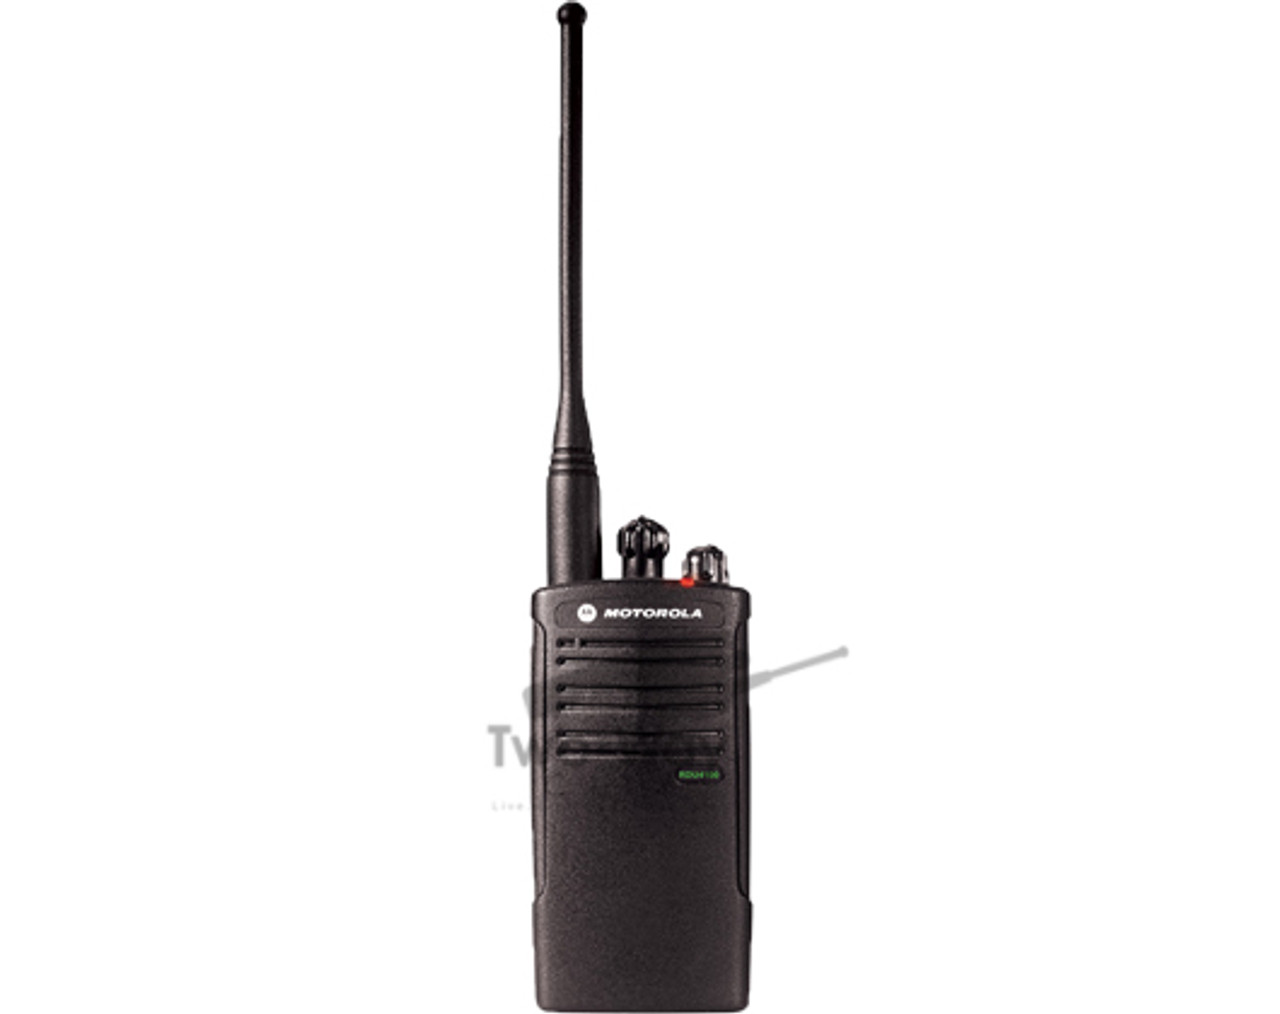 Motorola Six Pack of CLS1110 UHF Two Way Radios for your business is a  great buy on these 4.5 ounce walkie talkie that include holsters,  batteries, chargers and more.